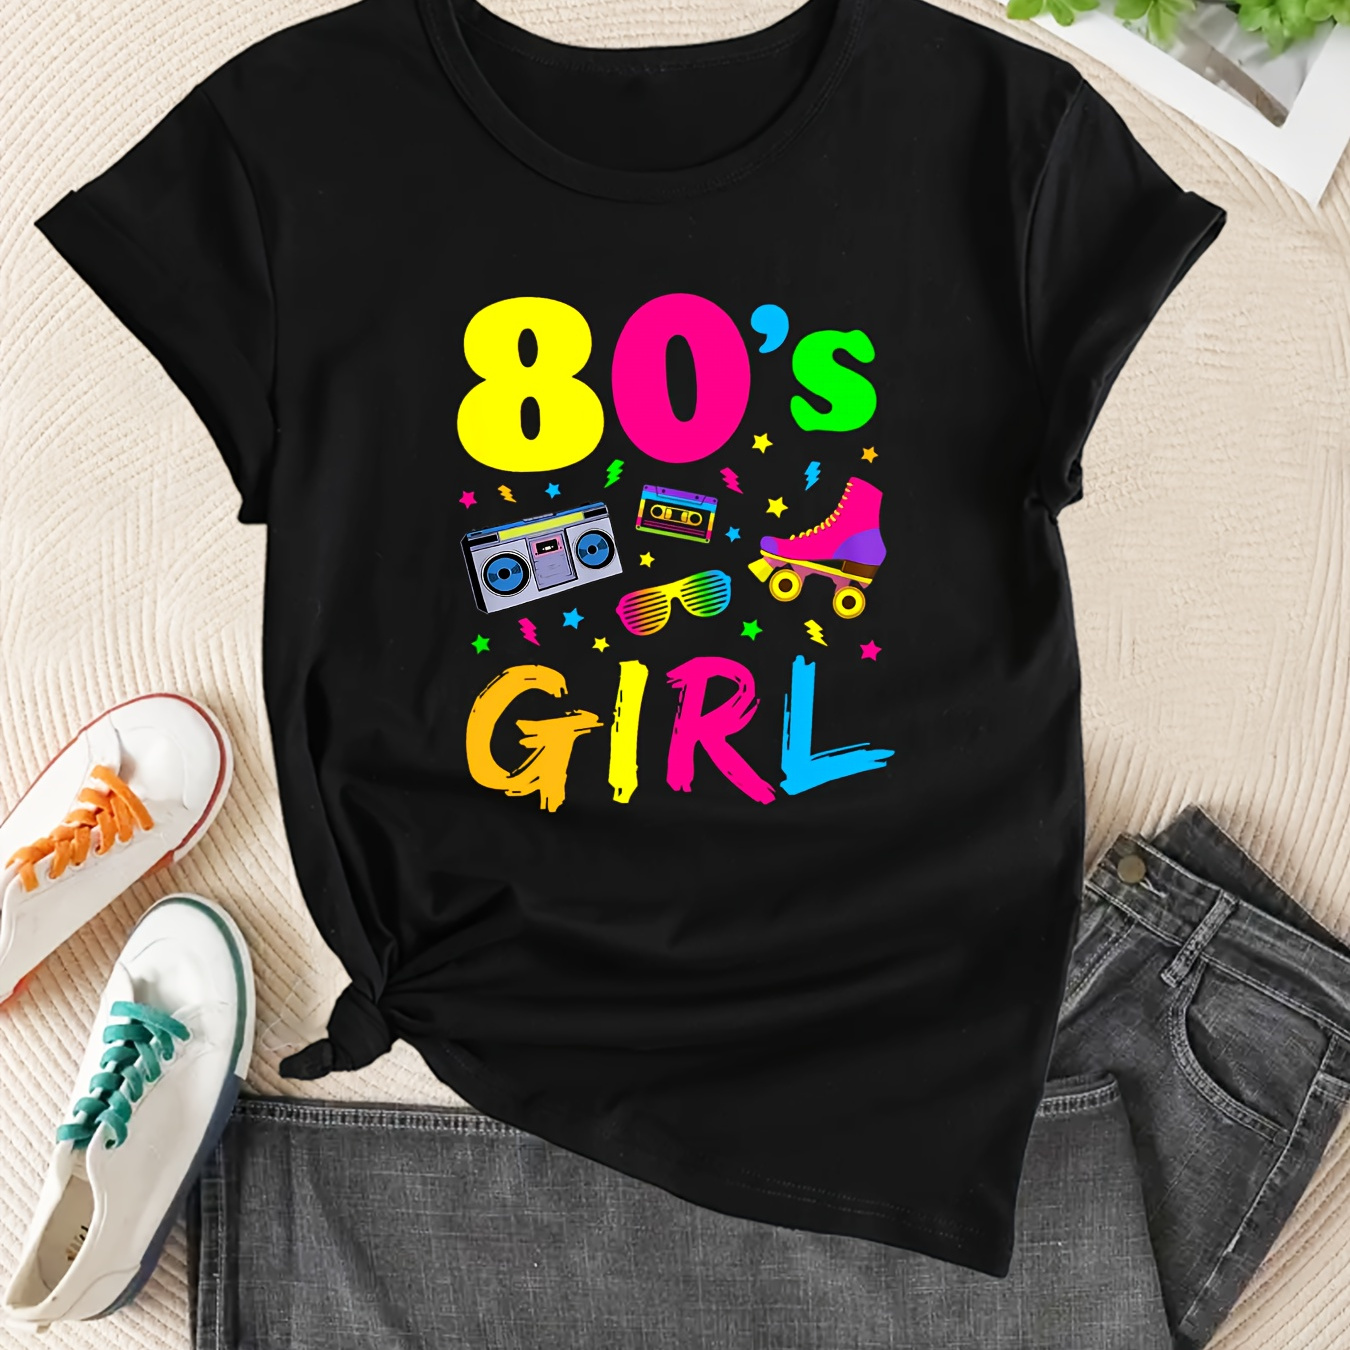 

Women's Retro 80's Girl Printed T-shirt | Casual Sports Style | Short-sleeve Round Neck Top | Spring And Summer Fashion For Ladies | Comfortable Fit And Soft Fabric